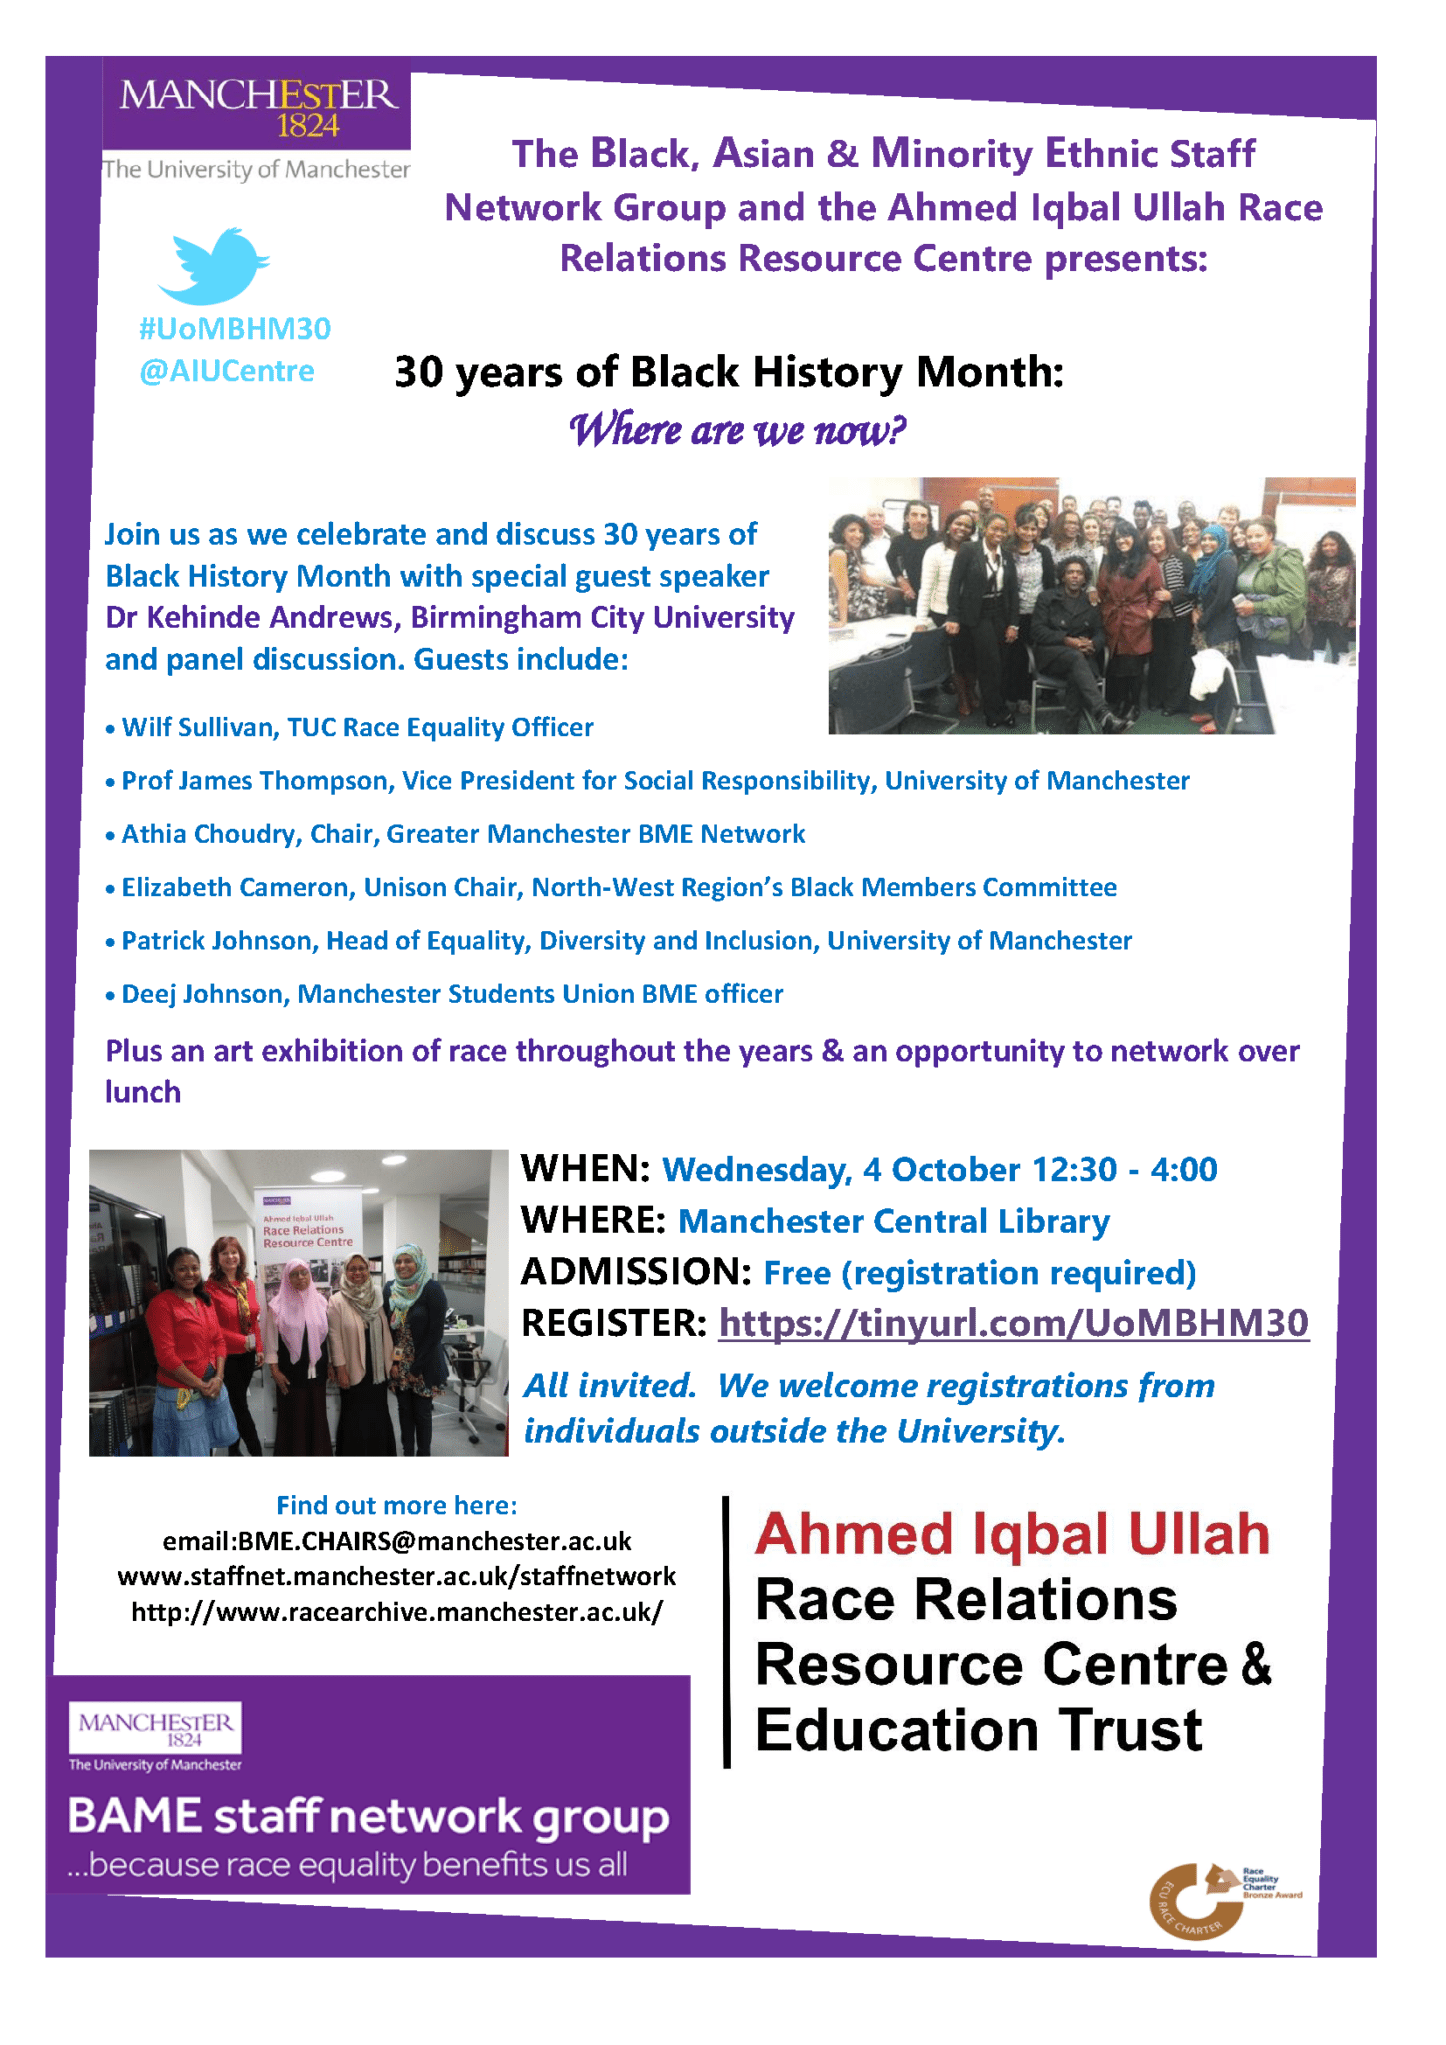 30 years of Black History Month. Where are we now? | Blacknet UK